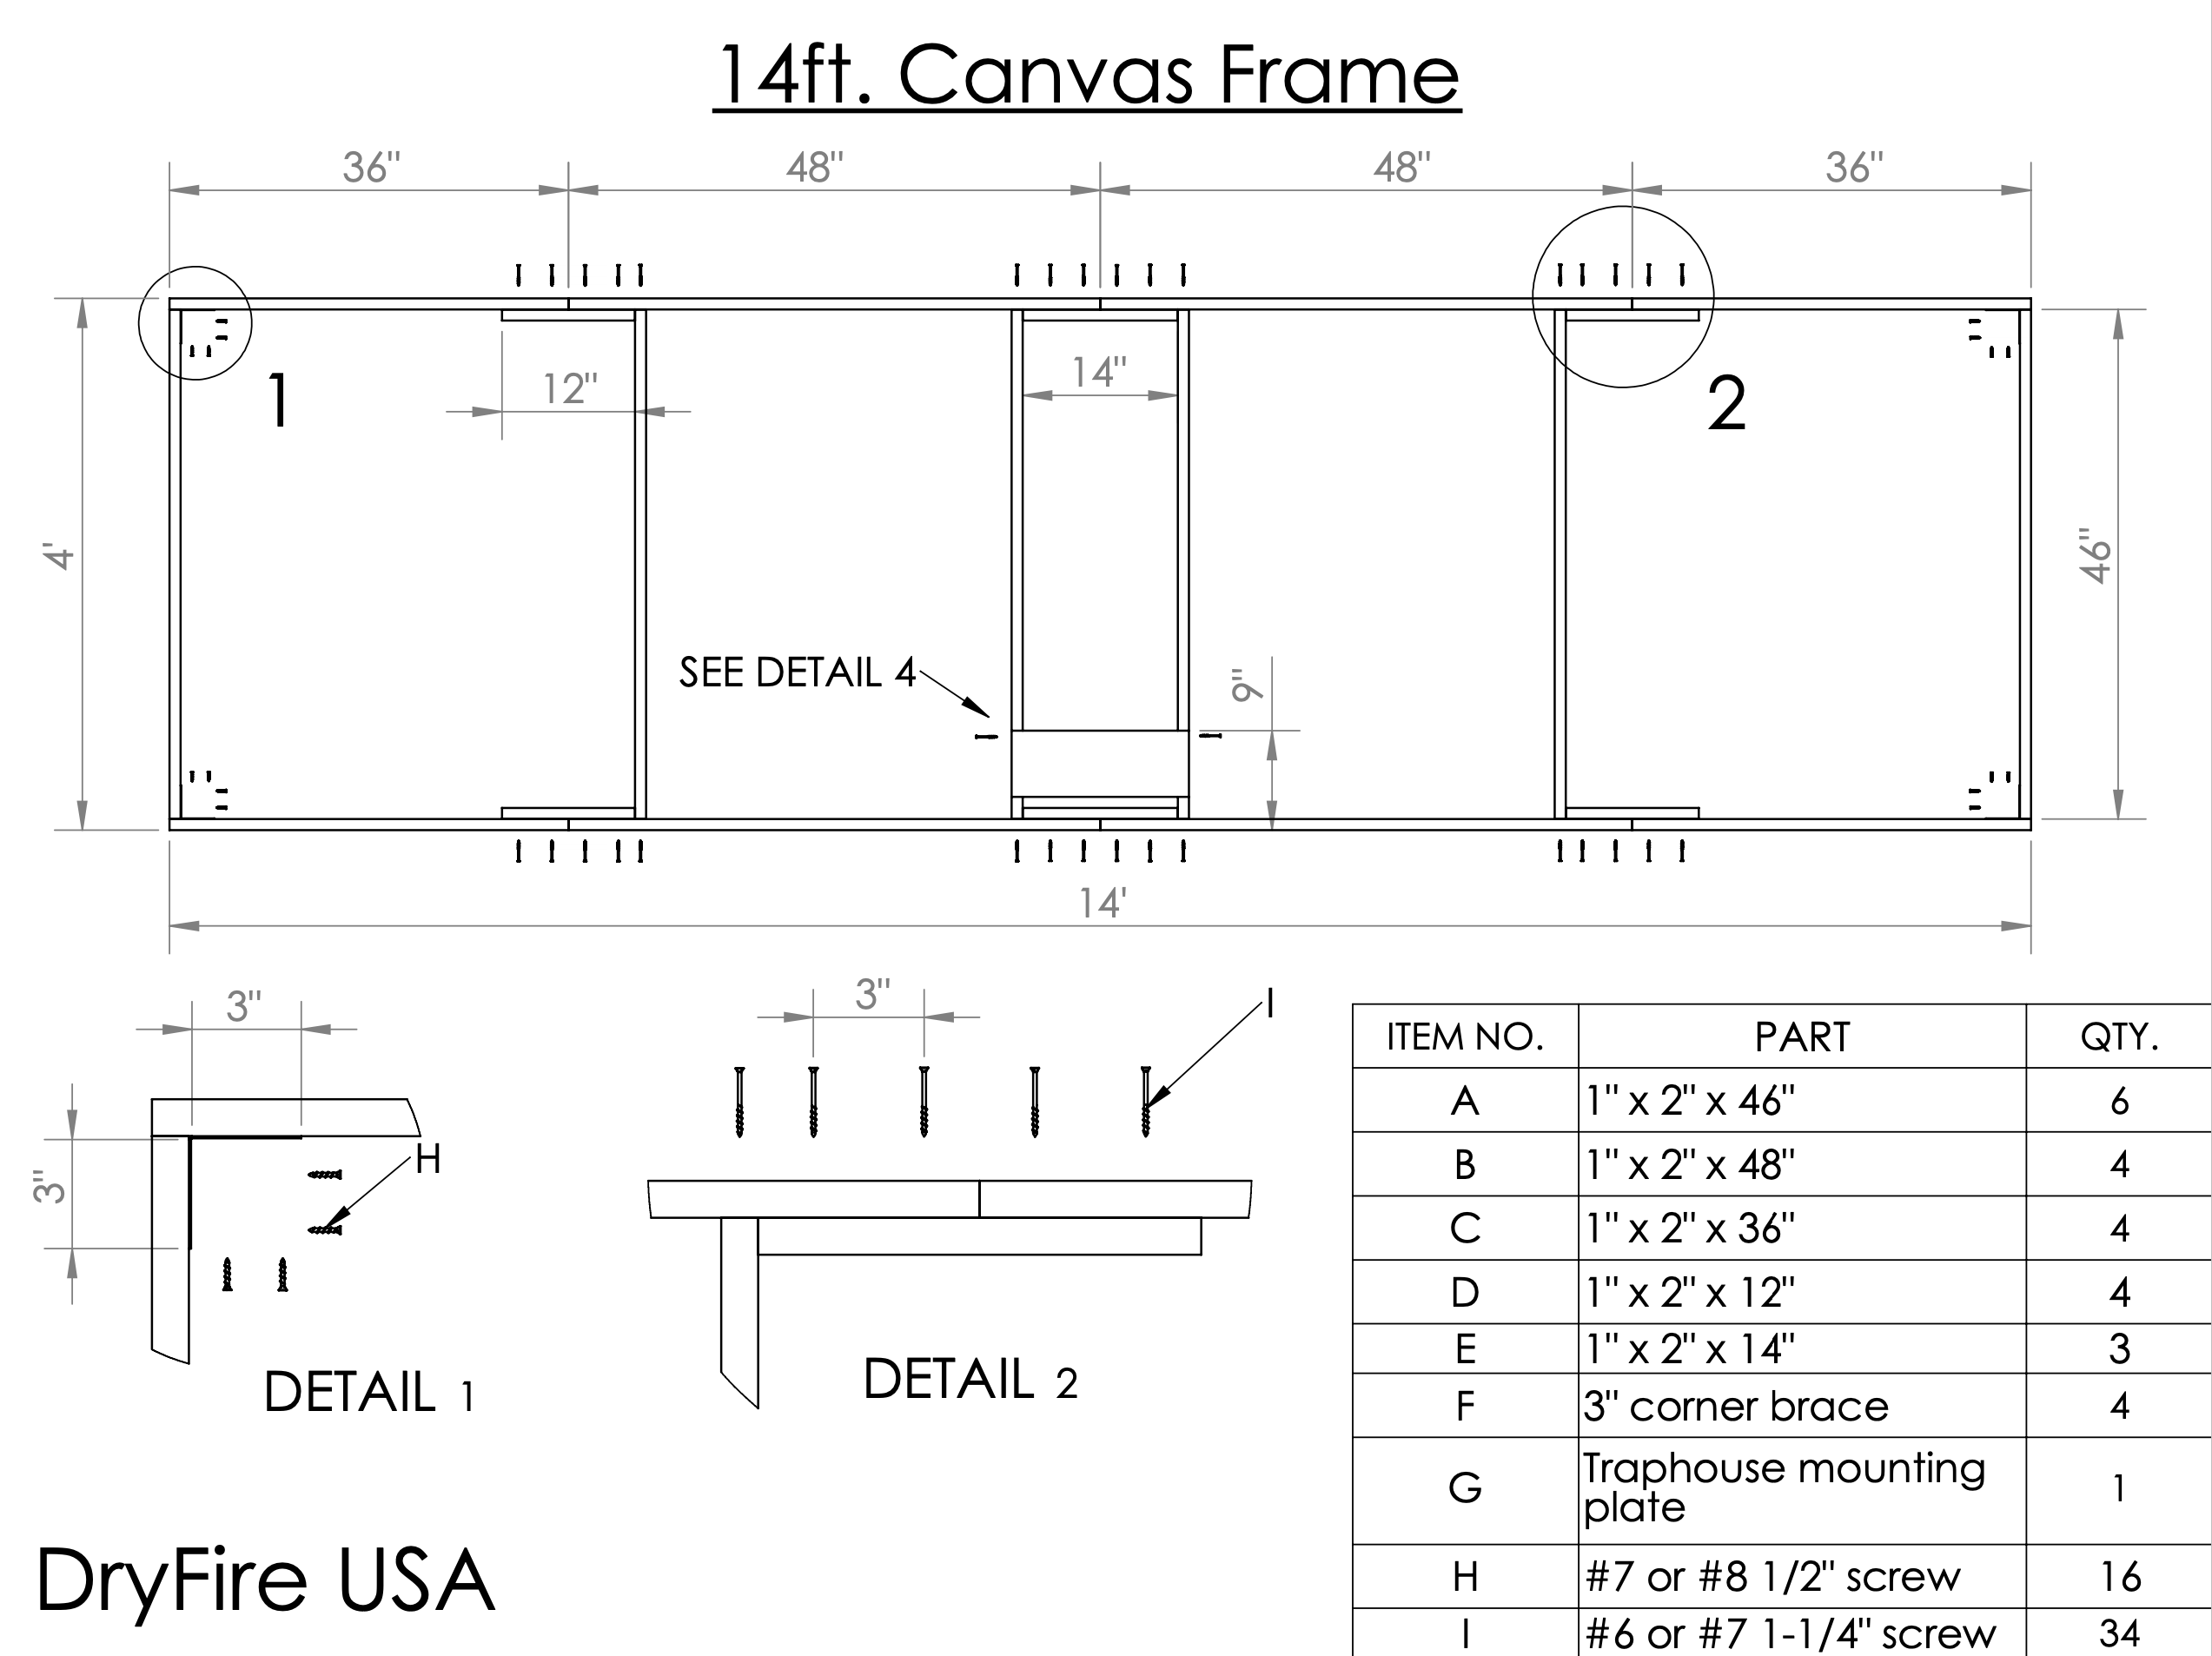 14 foot frame for DryFire USA Canvas Background Shooting Screen for indoor trap and skeet practice